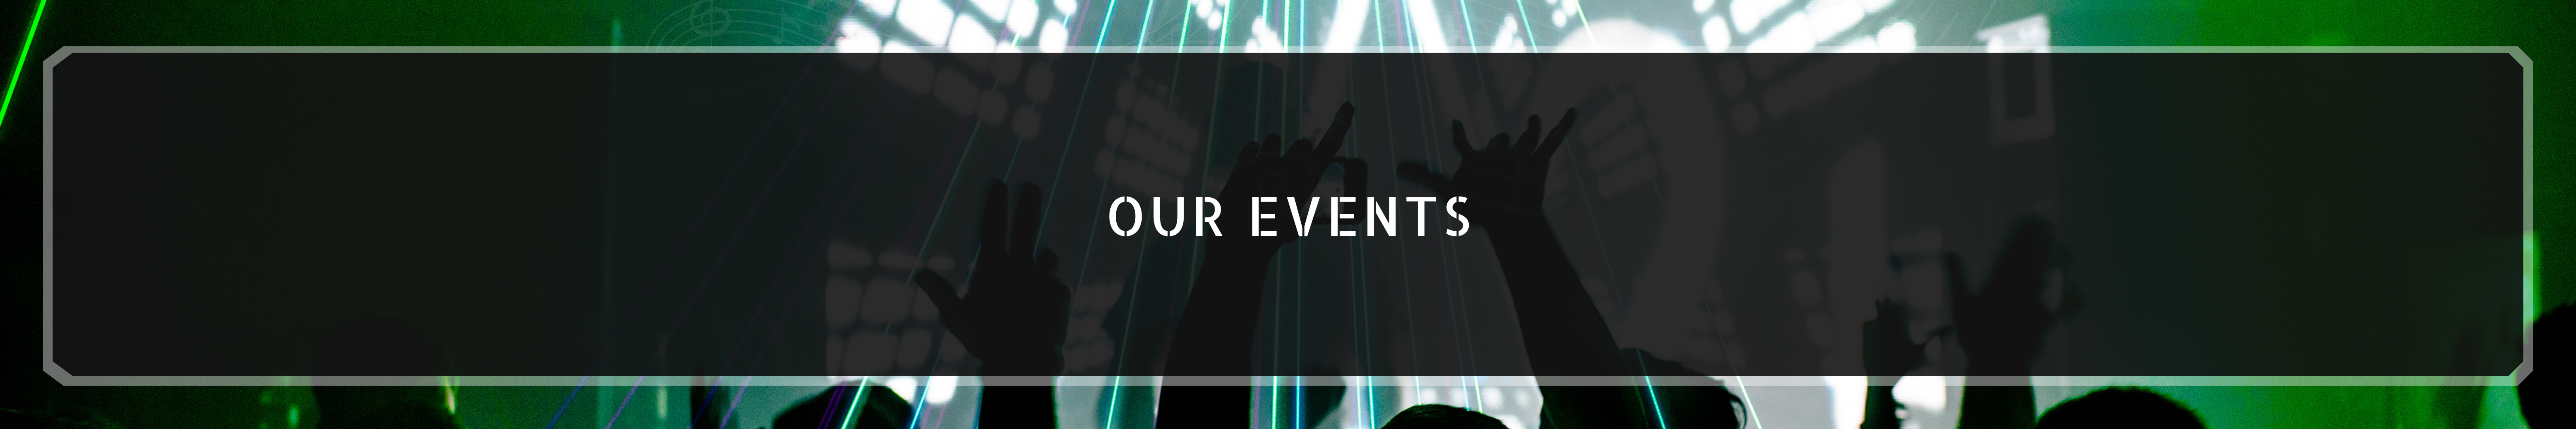 Event Banner (6000 × 1000 px)